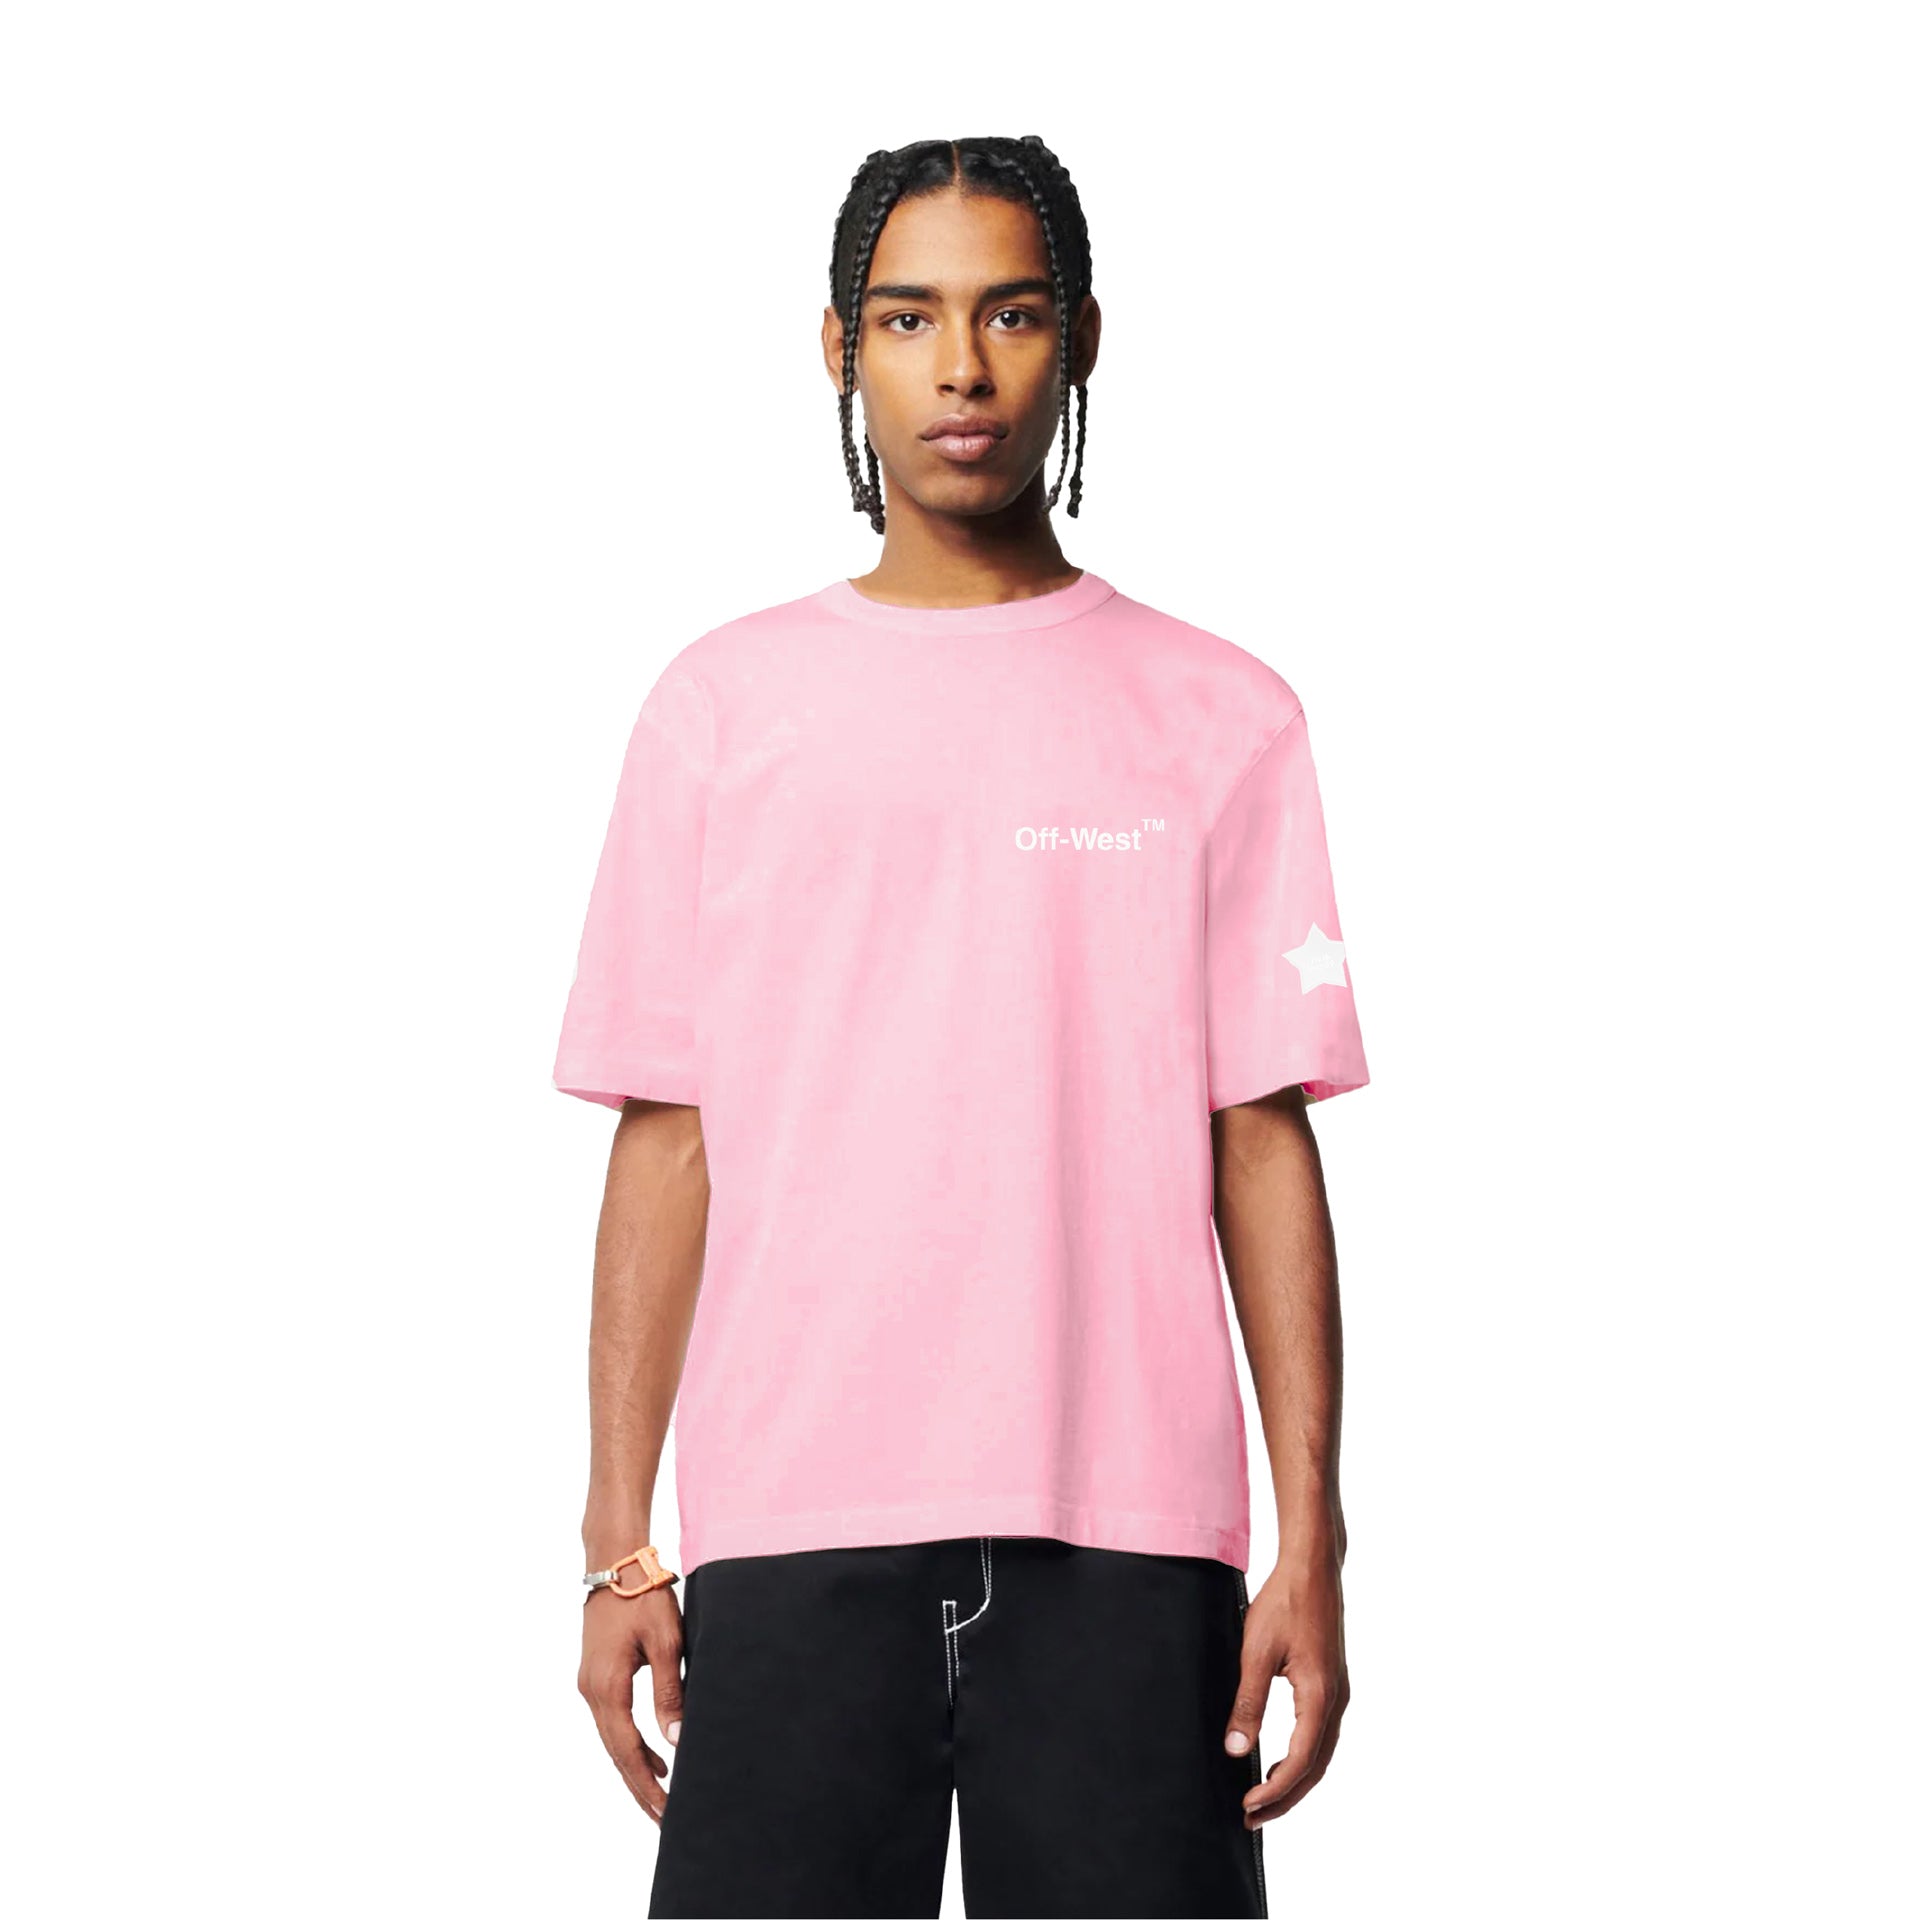 Pink T-shirt With a Back Print From I'm West